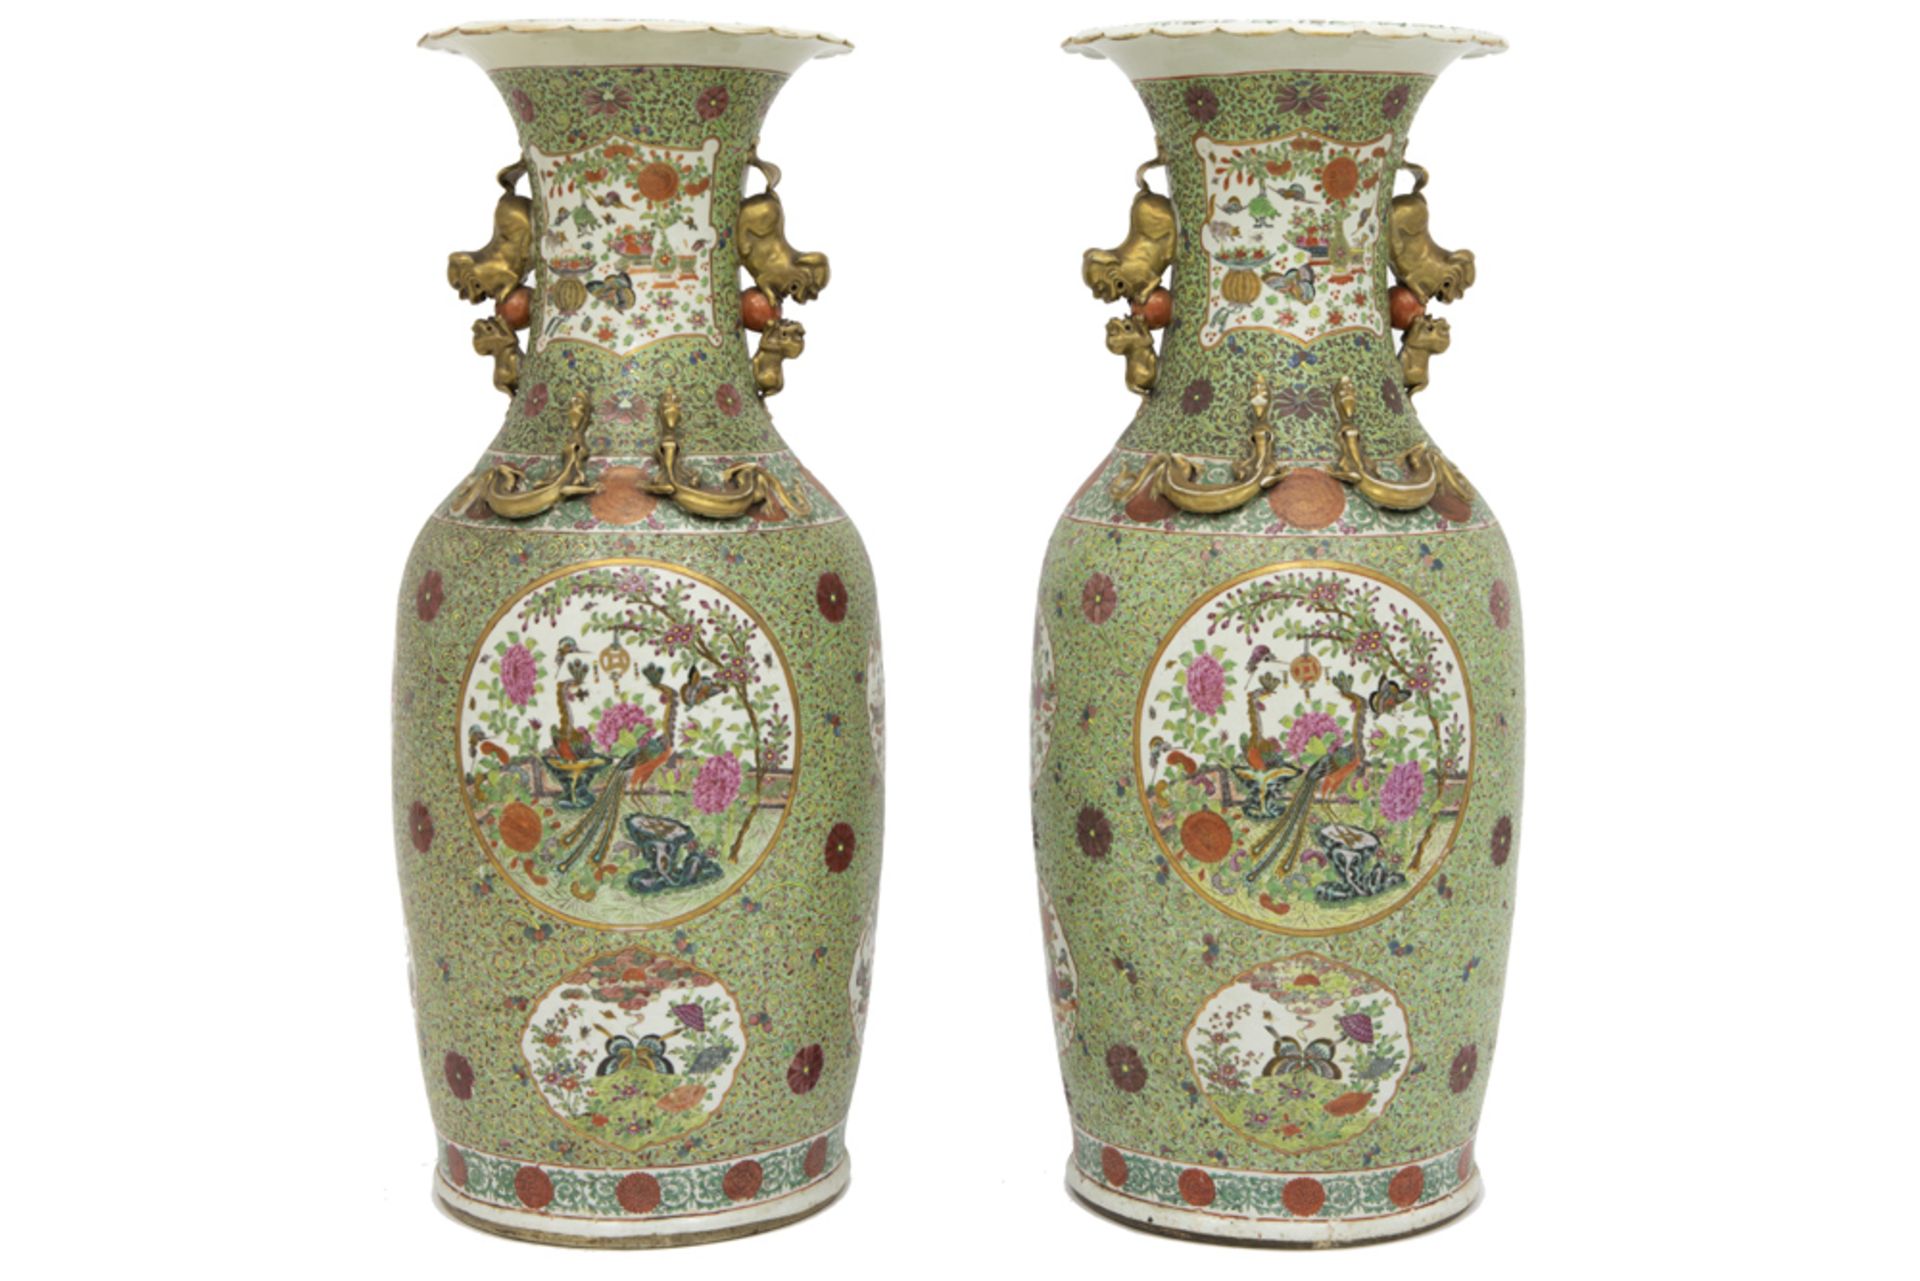 pair of big (90 cm high) antique Chinese vases in porcelain with a polychrome millefiori decor and - Image 3 of 5